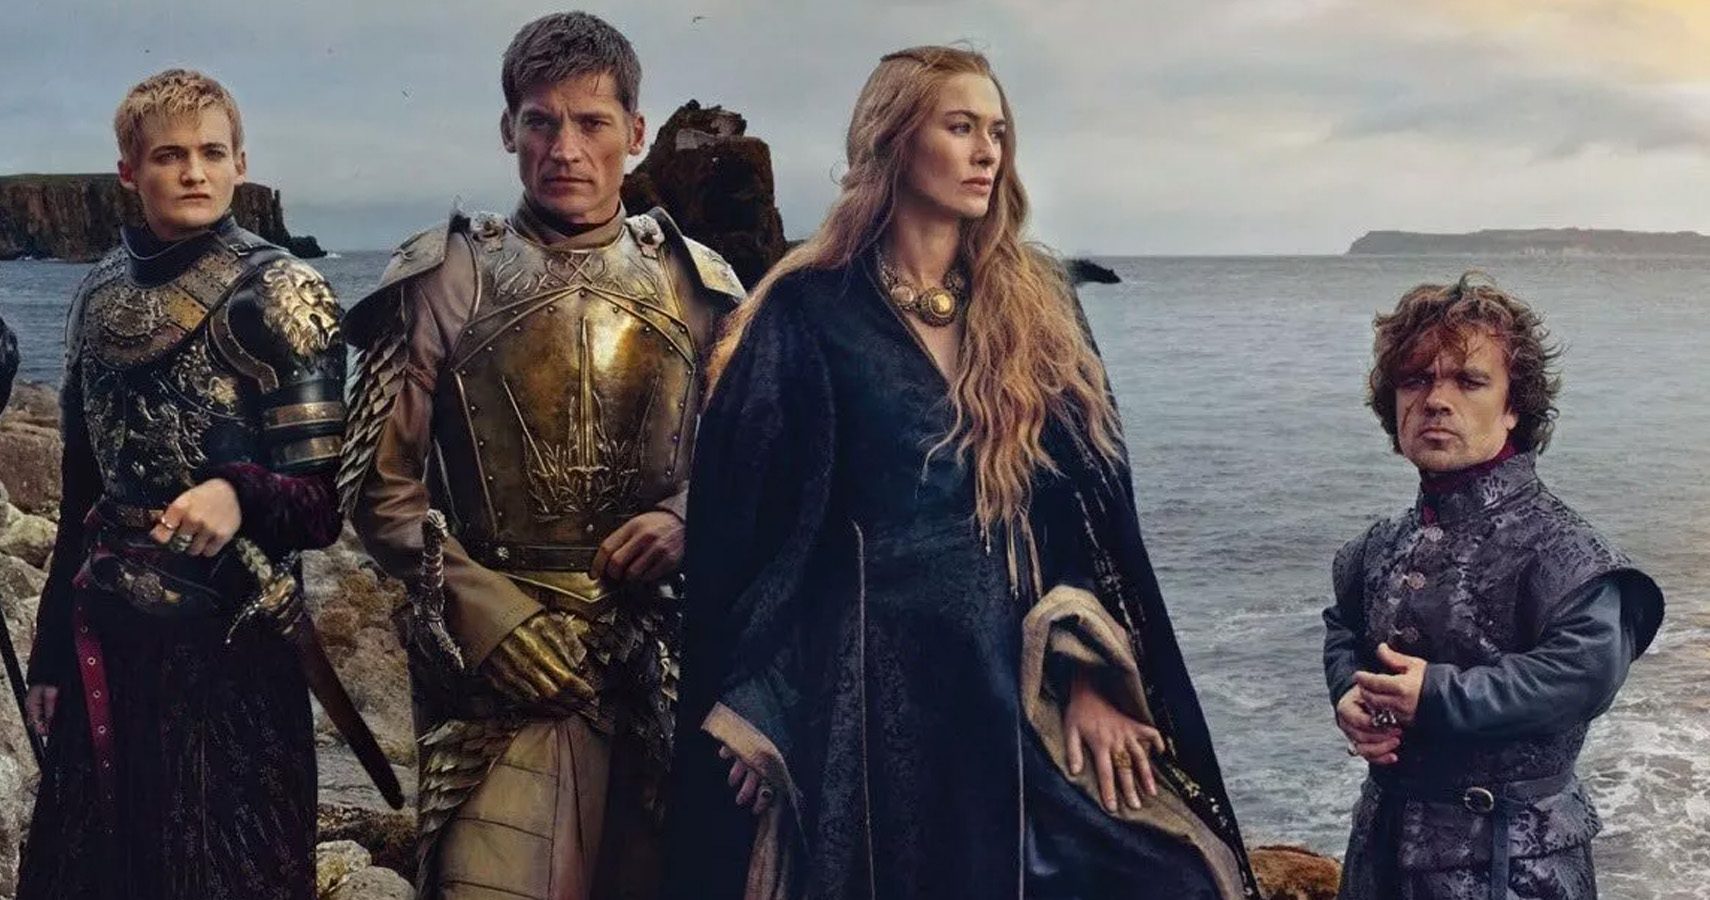 Game of Thrones Lannister family.